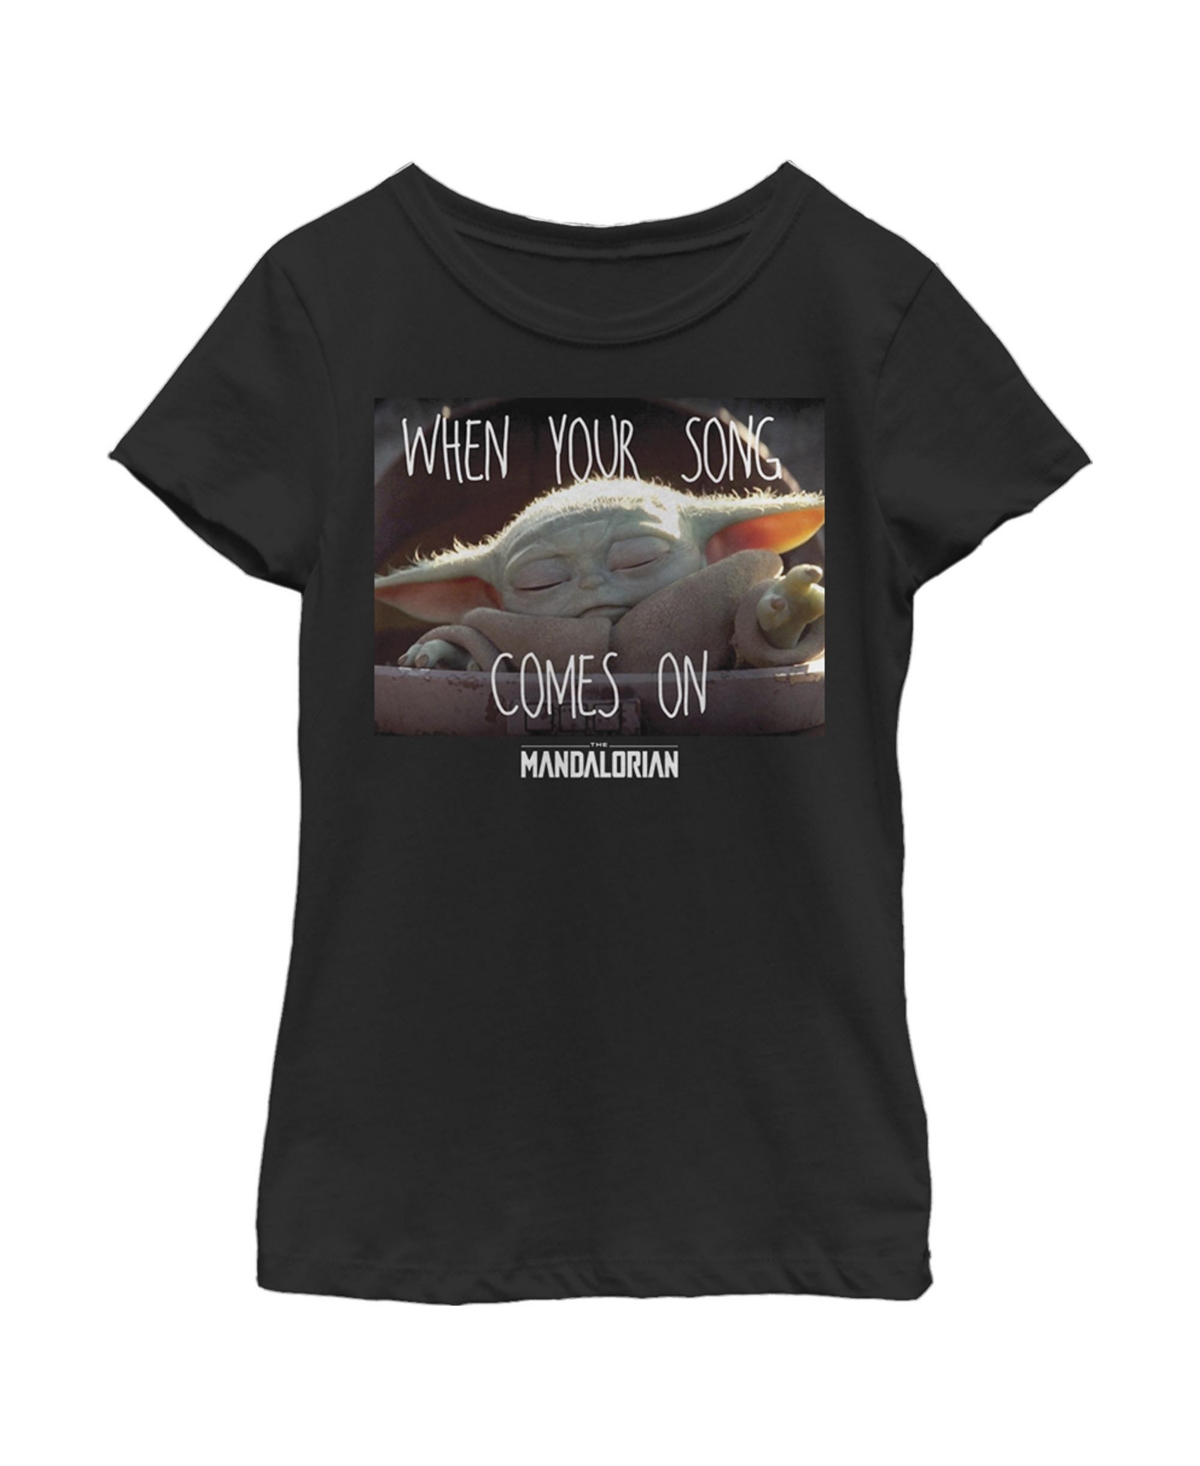 Disney Lucasfilm Kids' Girl's Star Wars: The Mandalorian The Child When Your Song Comes On Child T-shirt In Black